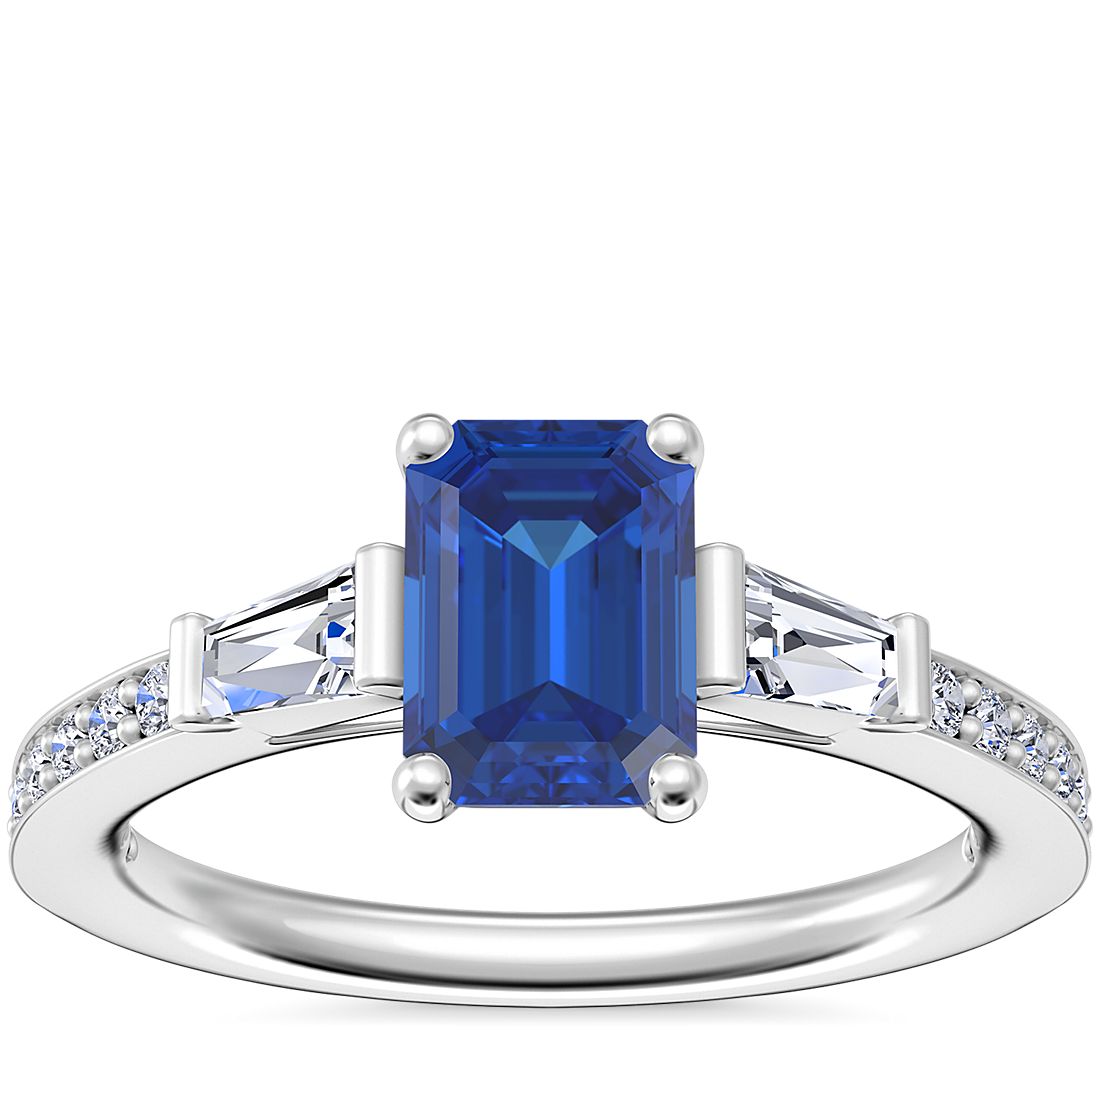 Tapered Baguette Diamond Cathedral Engagement Ring with Emerald-Cut Sapphire in 14k White Gold (7x5mm)